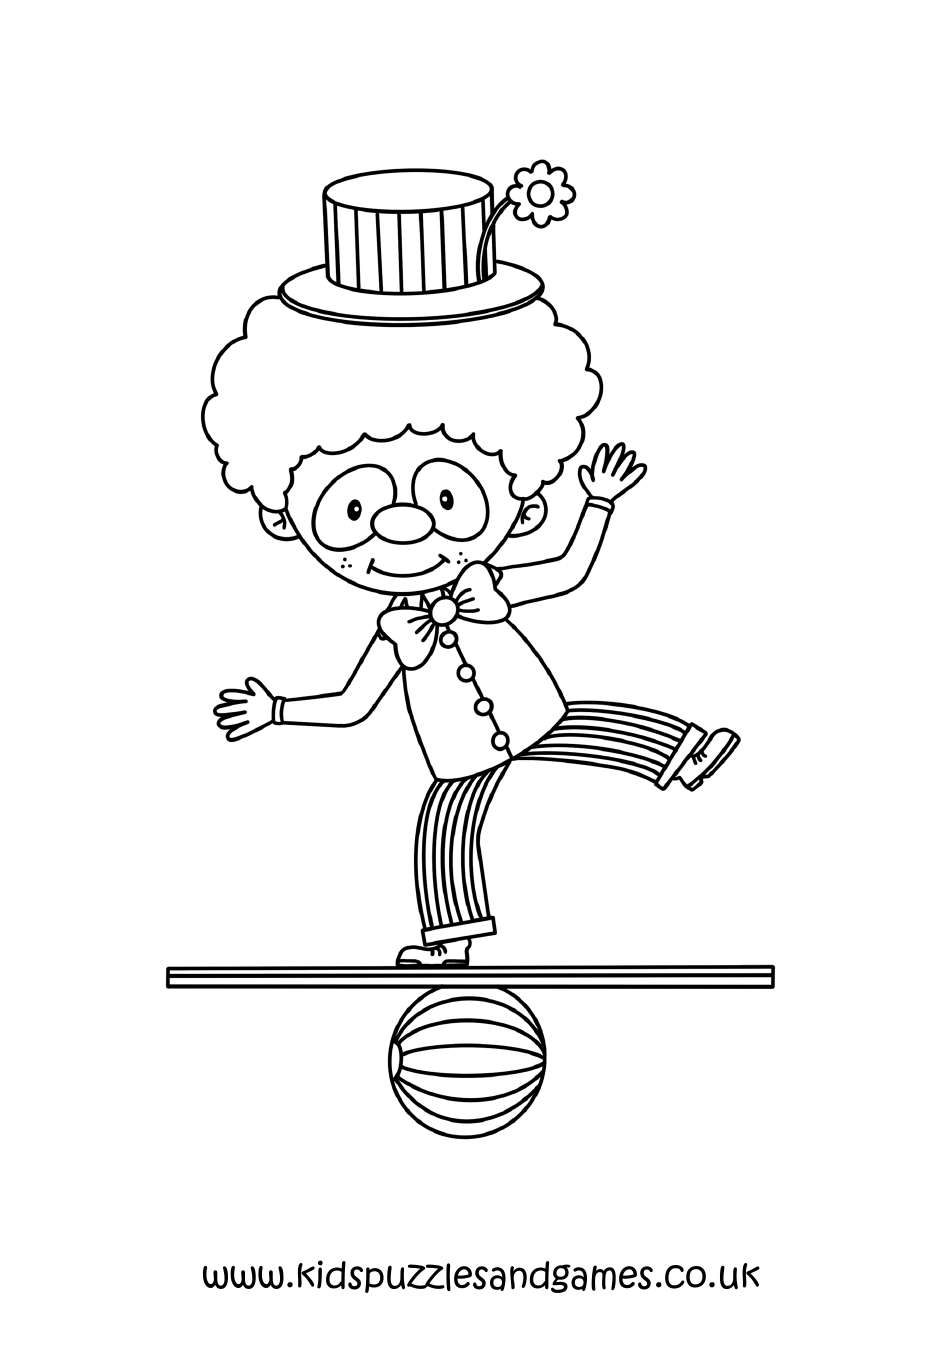 Clown Kid Coloring Page Image Preview